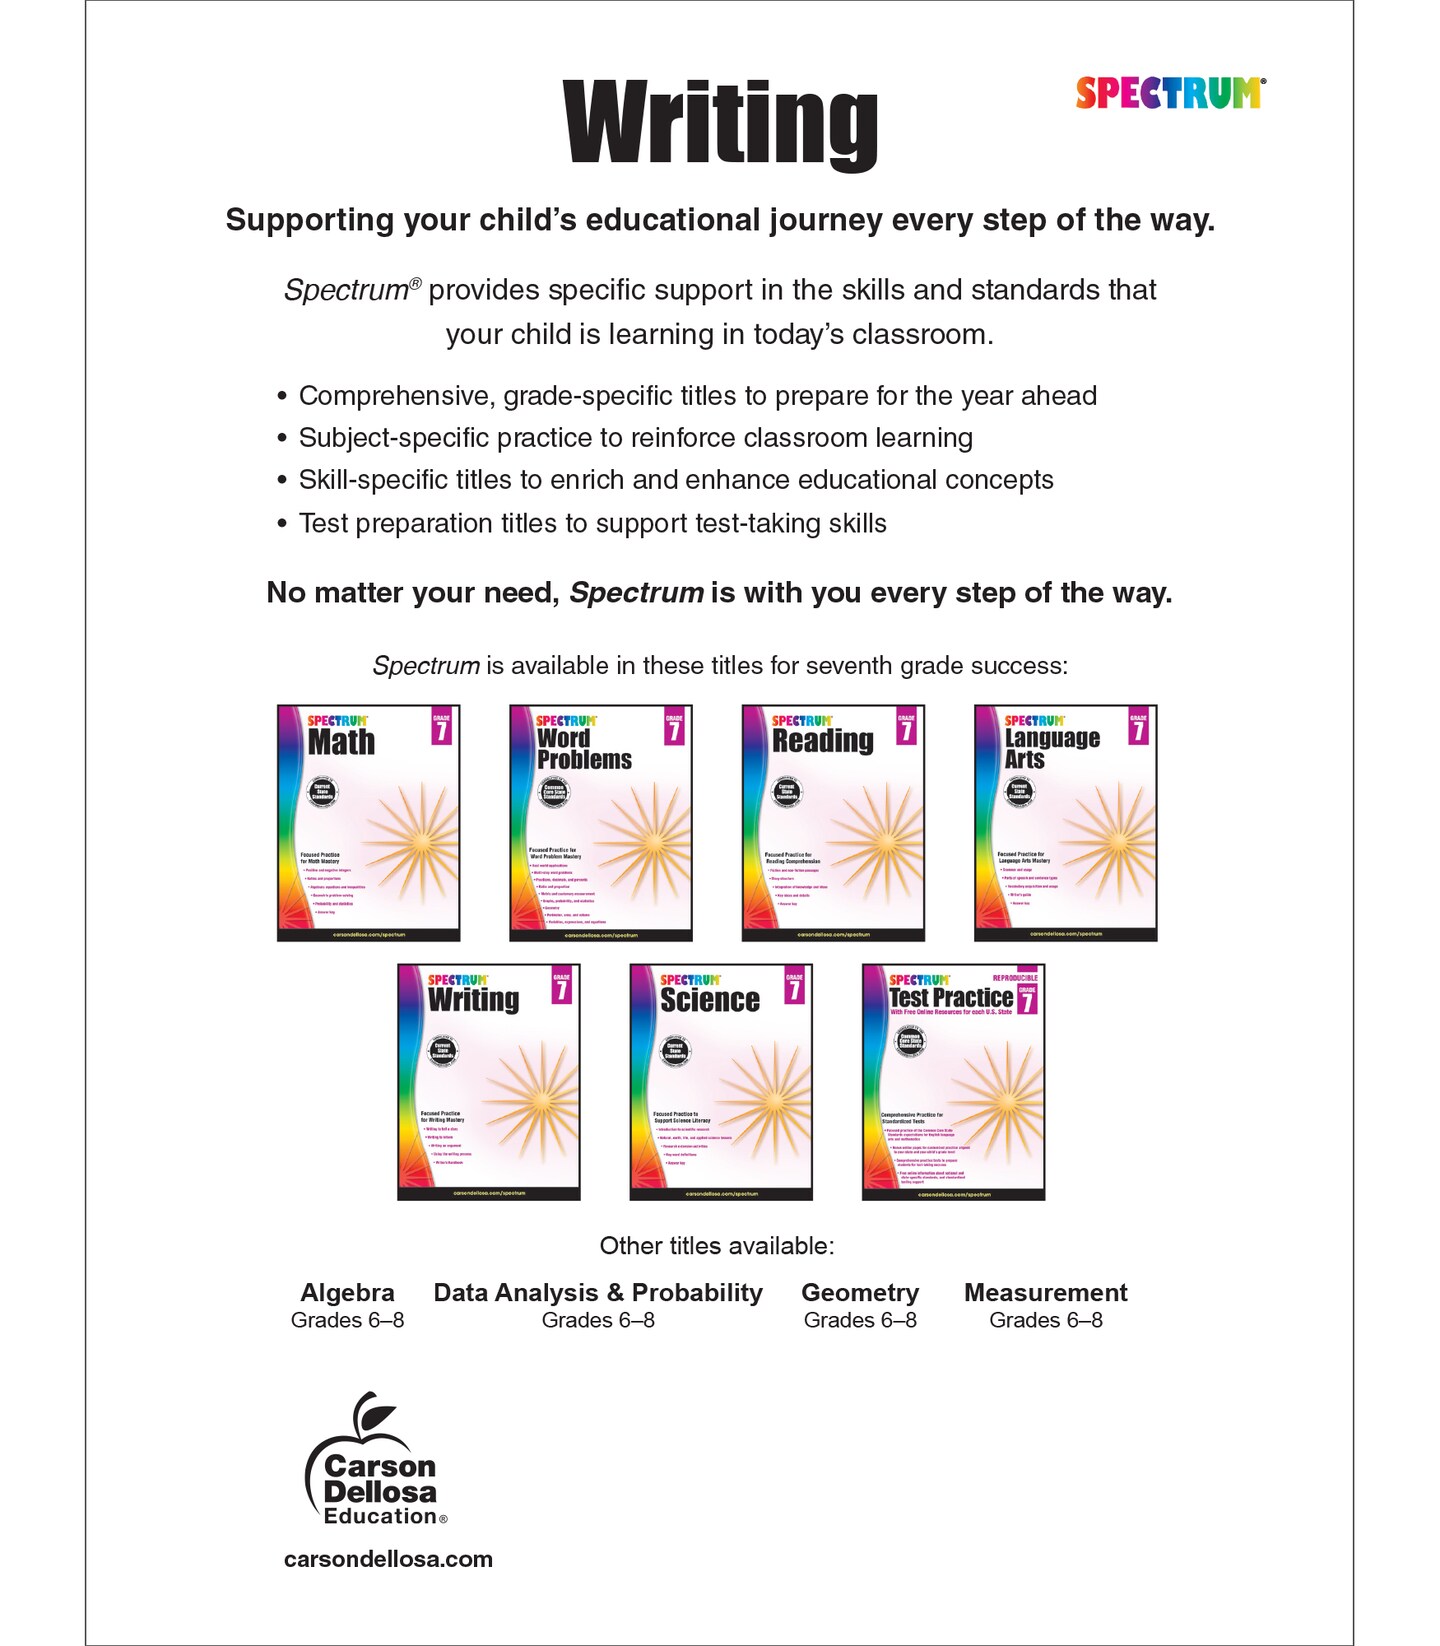 Spectrum 7th Grade Writing Workbooks, Ages 12 to 13, 7th Grade Writing, Informative, Argumentative, Comparative, and Fiction Story Writing Prompts, Writing Practice for Kids - 136 Pages